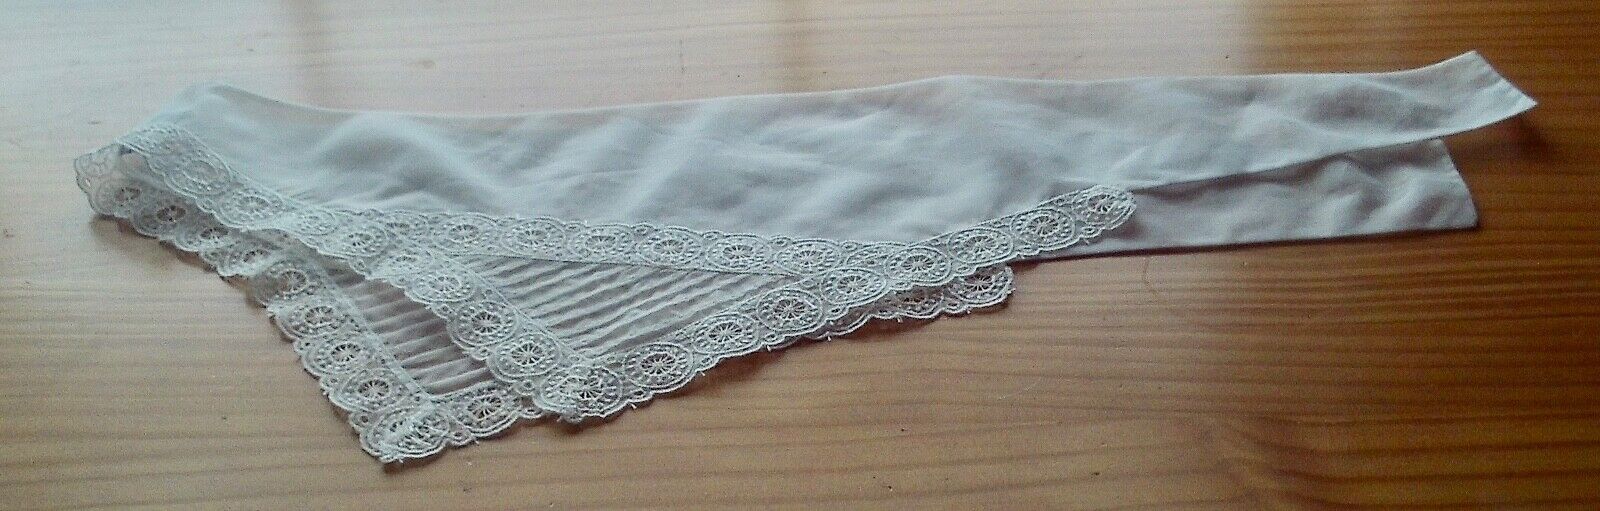 by Kraines Vintage Sheer & Lace Collar About 42